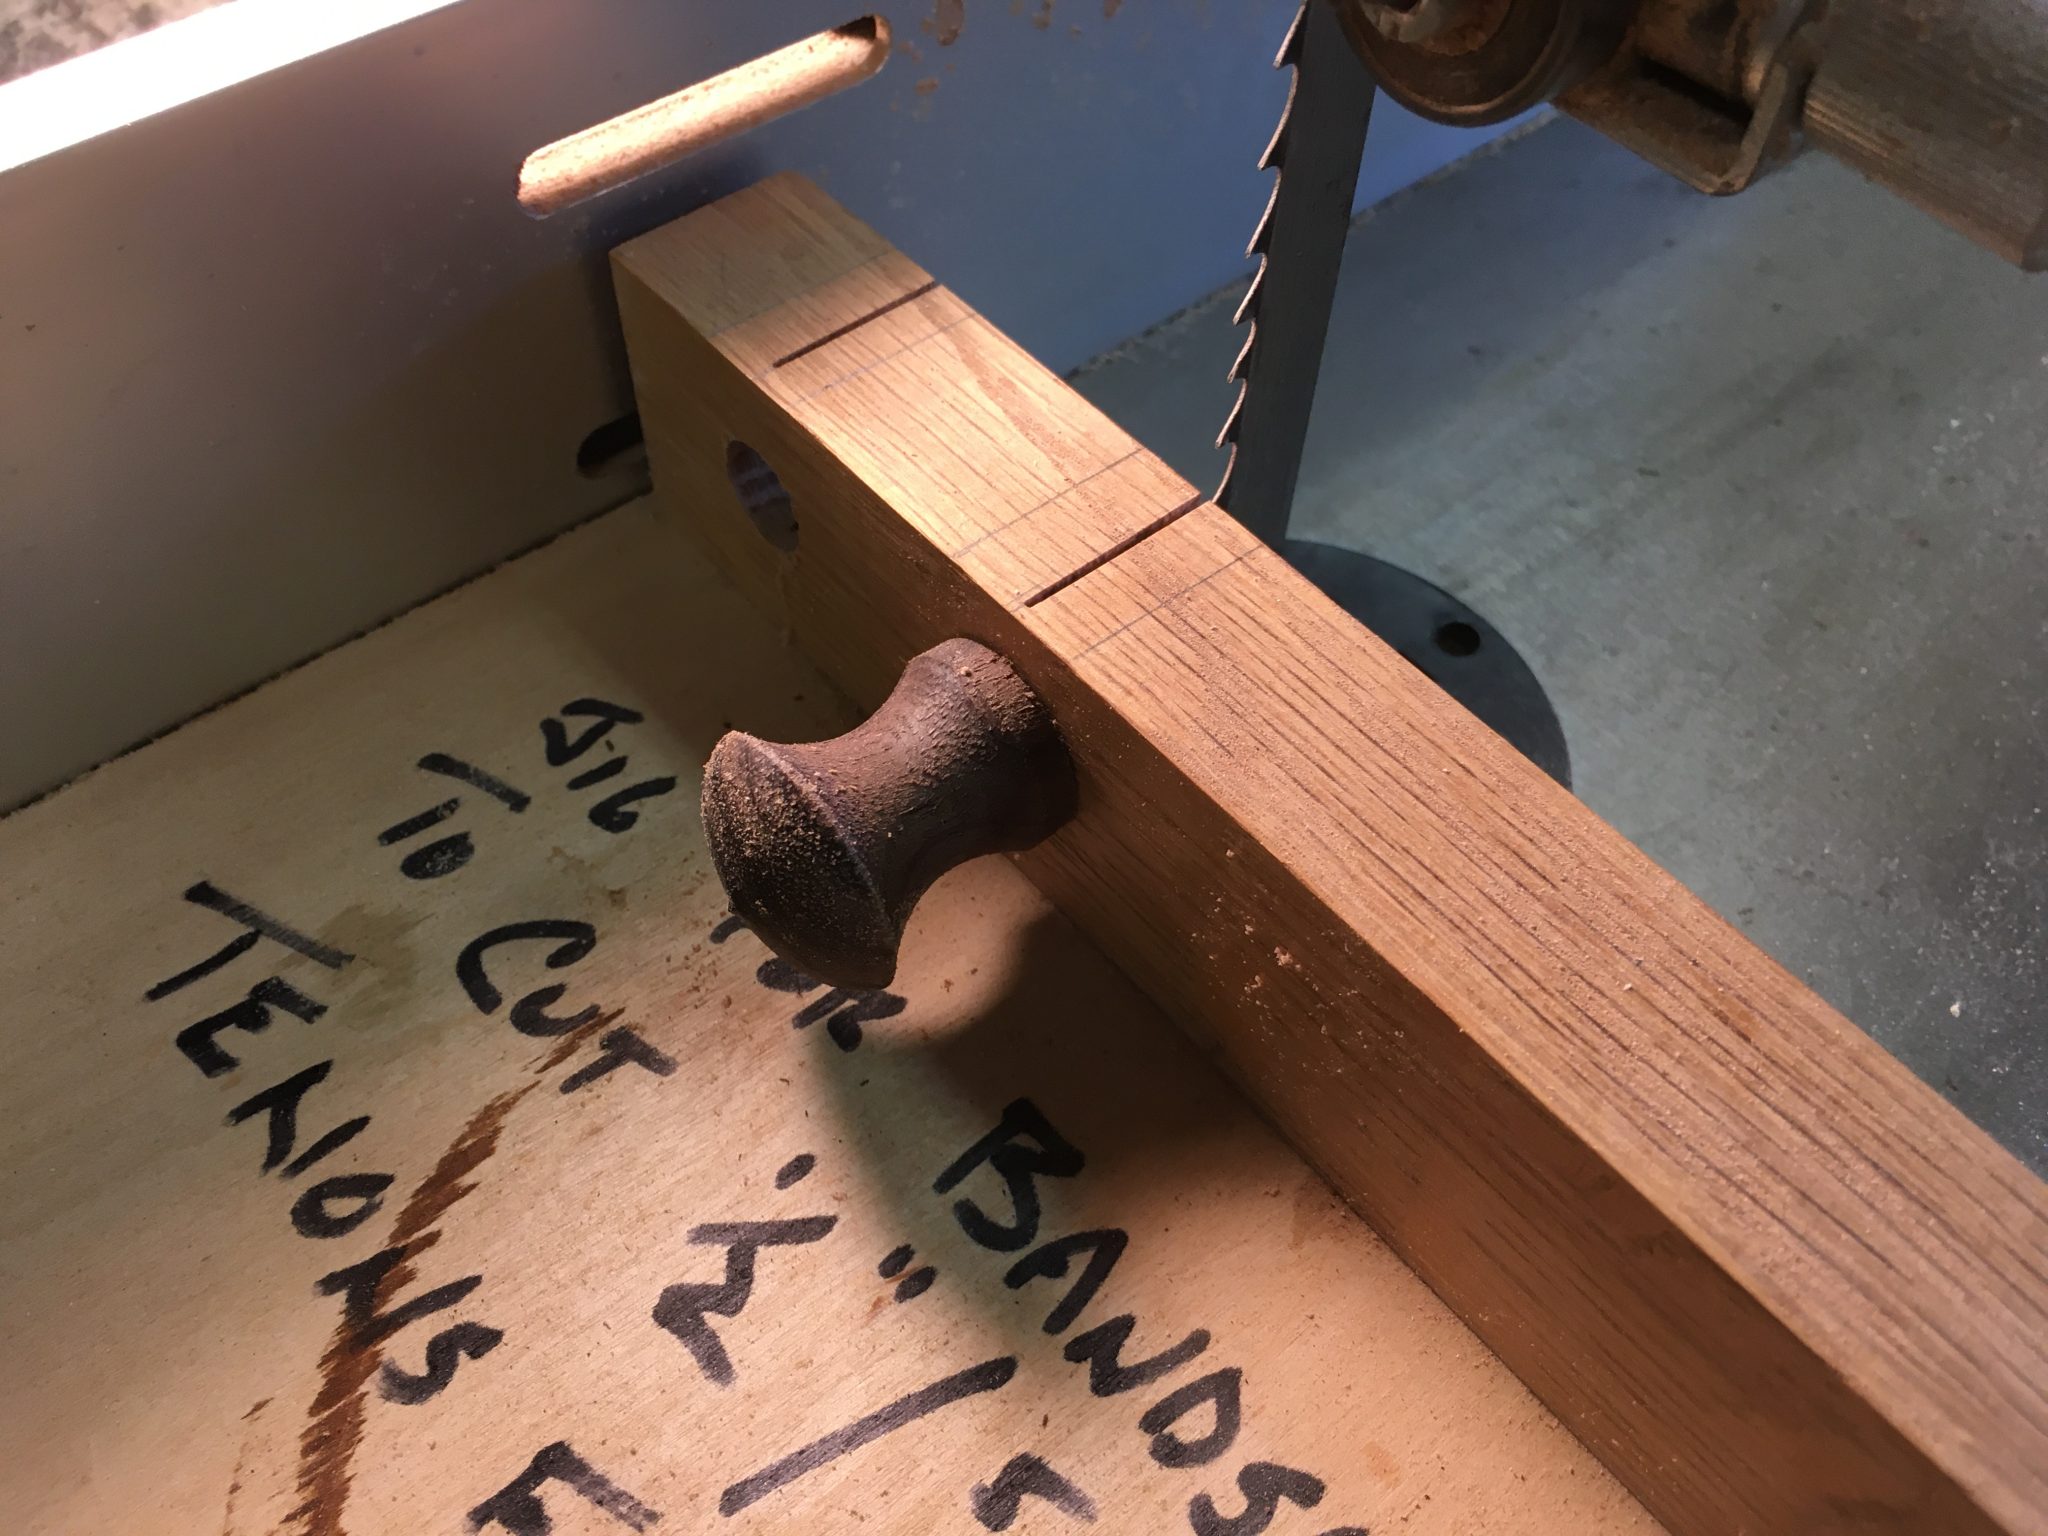 This jig makes it easy to cut a kerf into the exact center of the tenon on a turned knob.  Simply drill a hole (or as many holes as you have sizes of tenons) in a piece of scrap wood sized so the tenon fits snugly.  Mount it to the edge of a square piece of plywood.  Insert the knob, make the cut